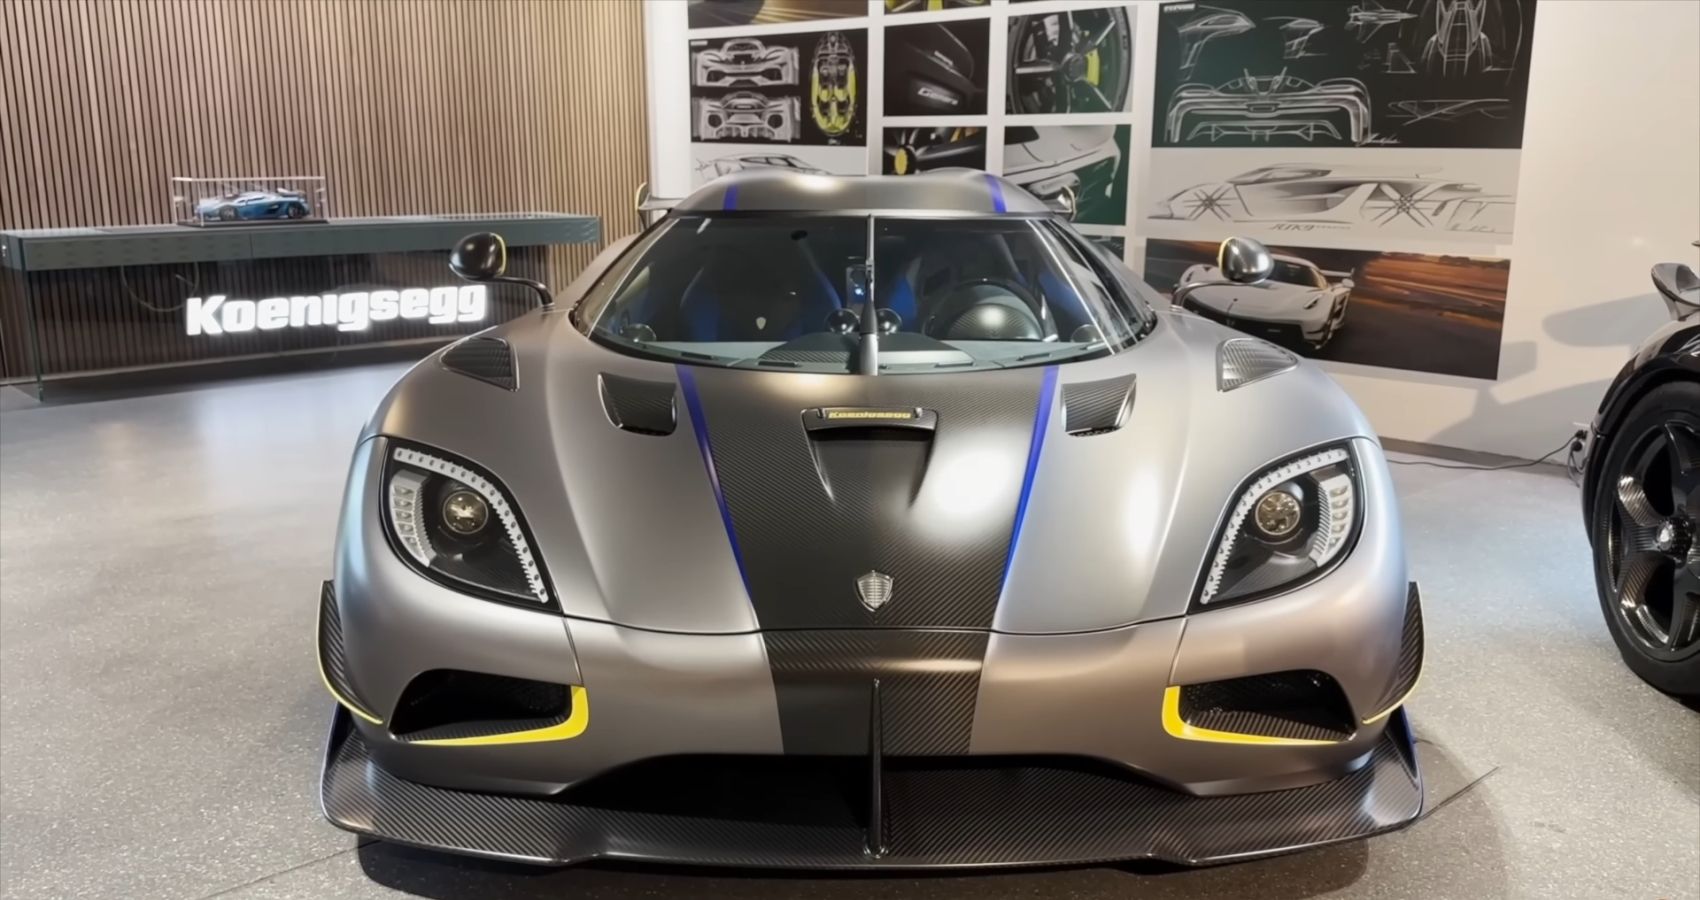 The World’s Best Koenigsegg Collection In Switzerland Is Simply Insane